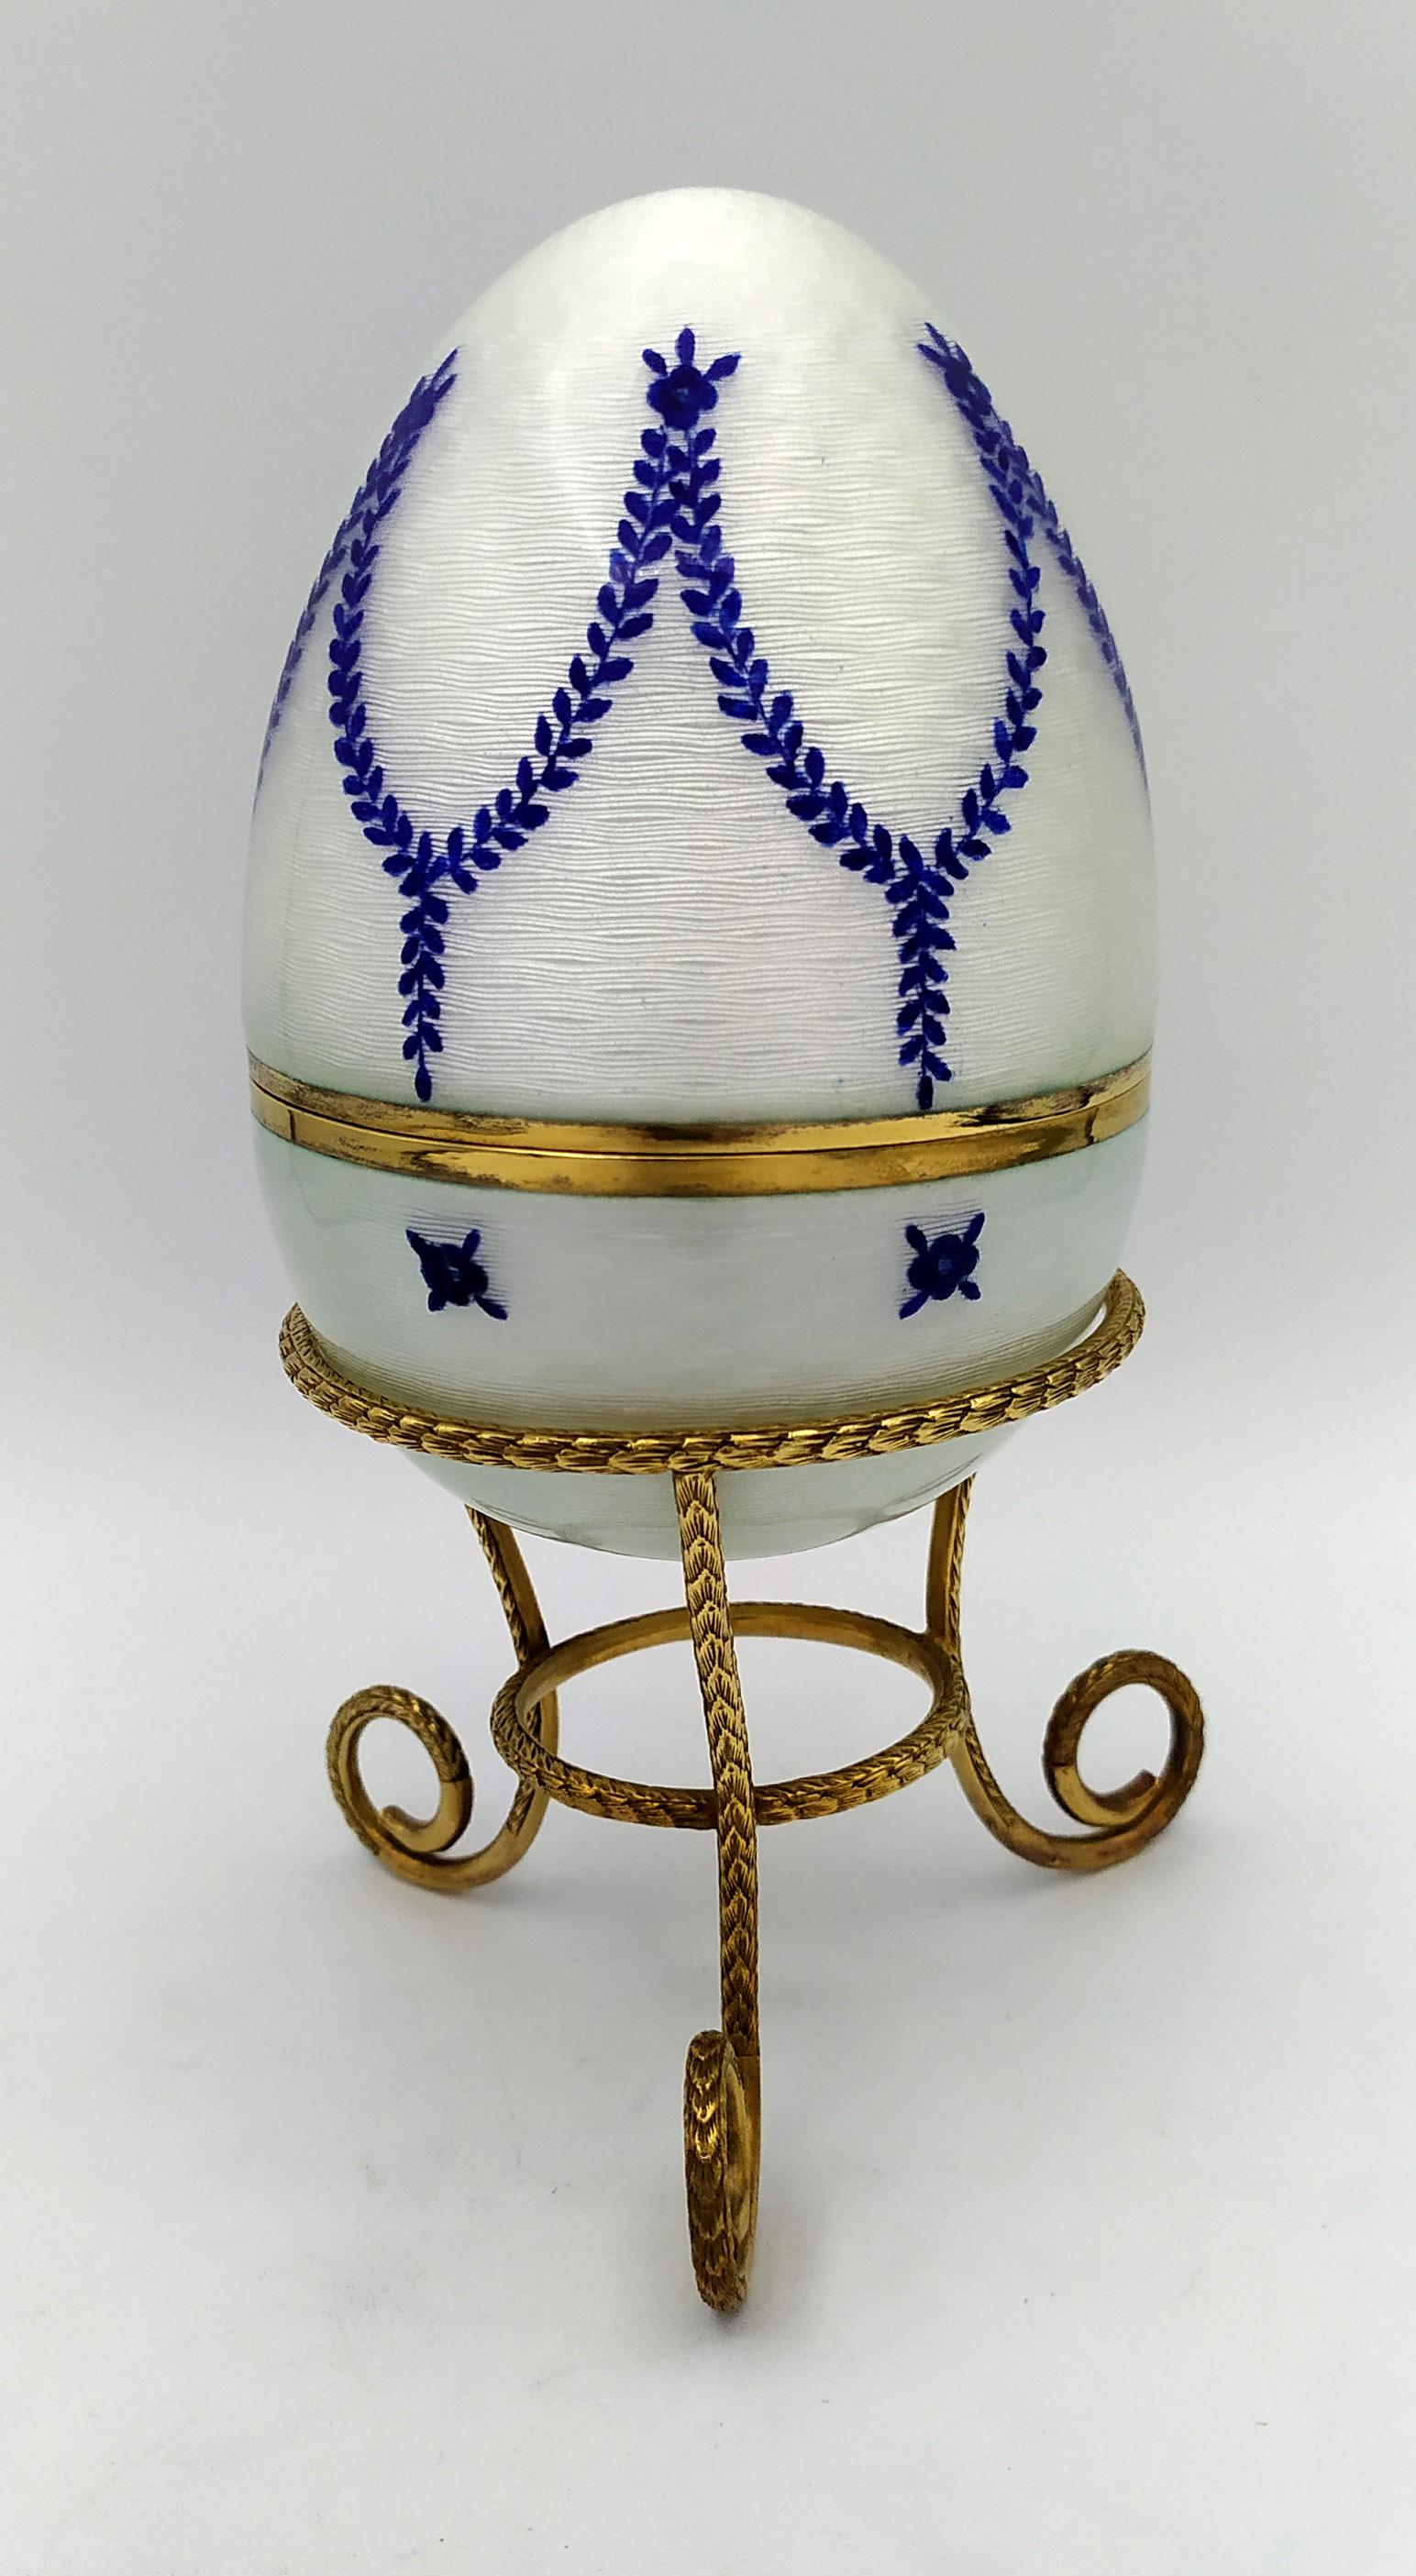 

Egg White with blue garlands is in 925/1000 sterling silver.
Egg White with blue garlands has fired enamels on guilloché and design engraved by hand.
Egg White with blue garlands is on tall tripod with laurel.
Egg White with blue garlands is in